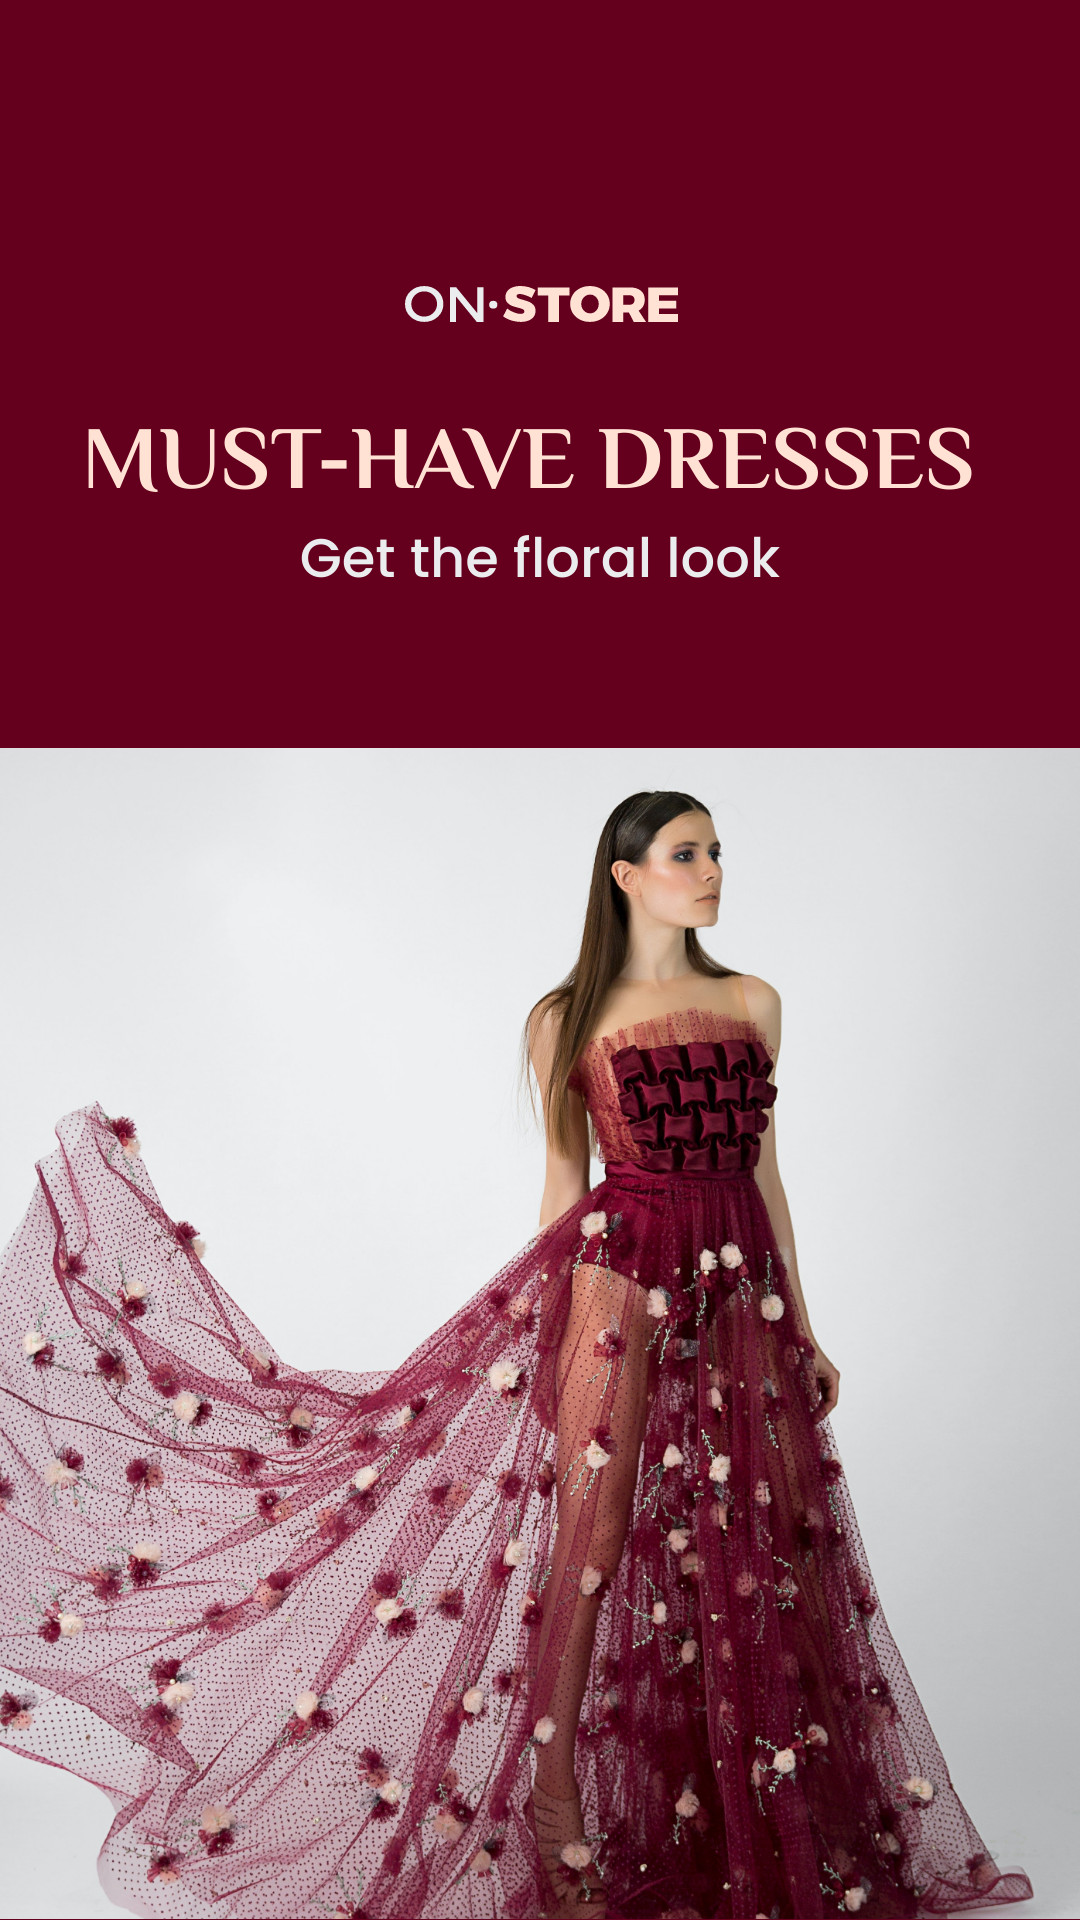 Must-have Dresses for Floral Look Inline Rectangle 300x250